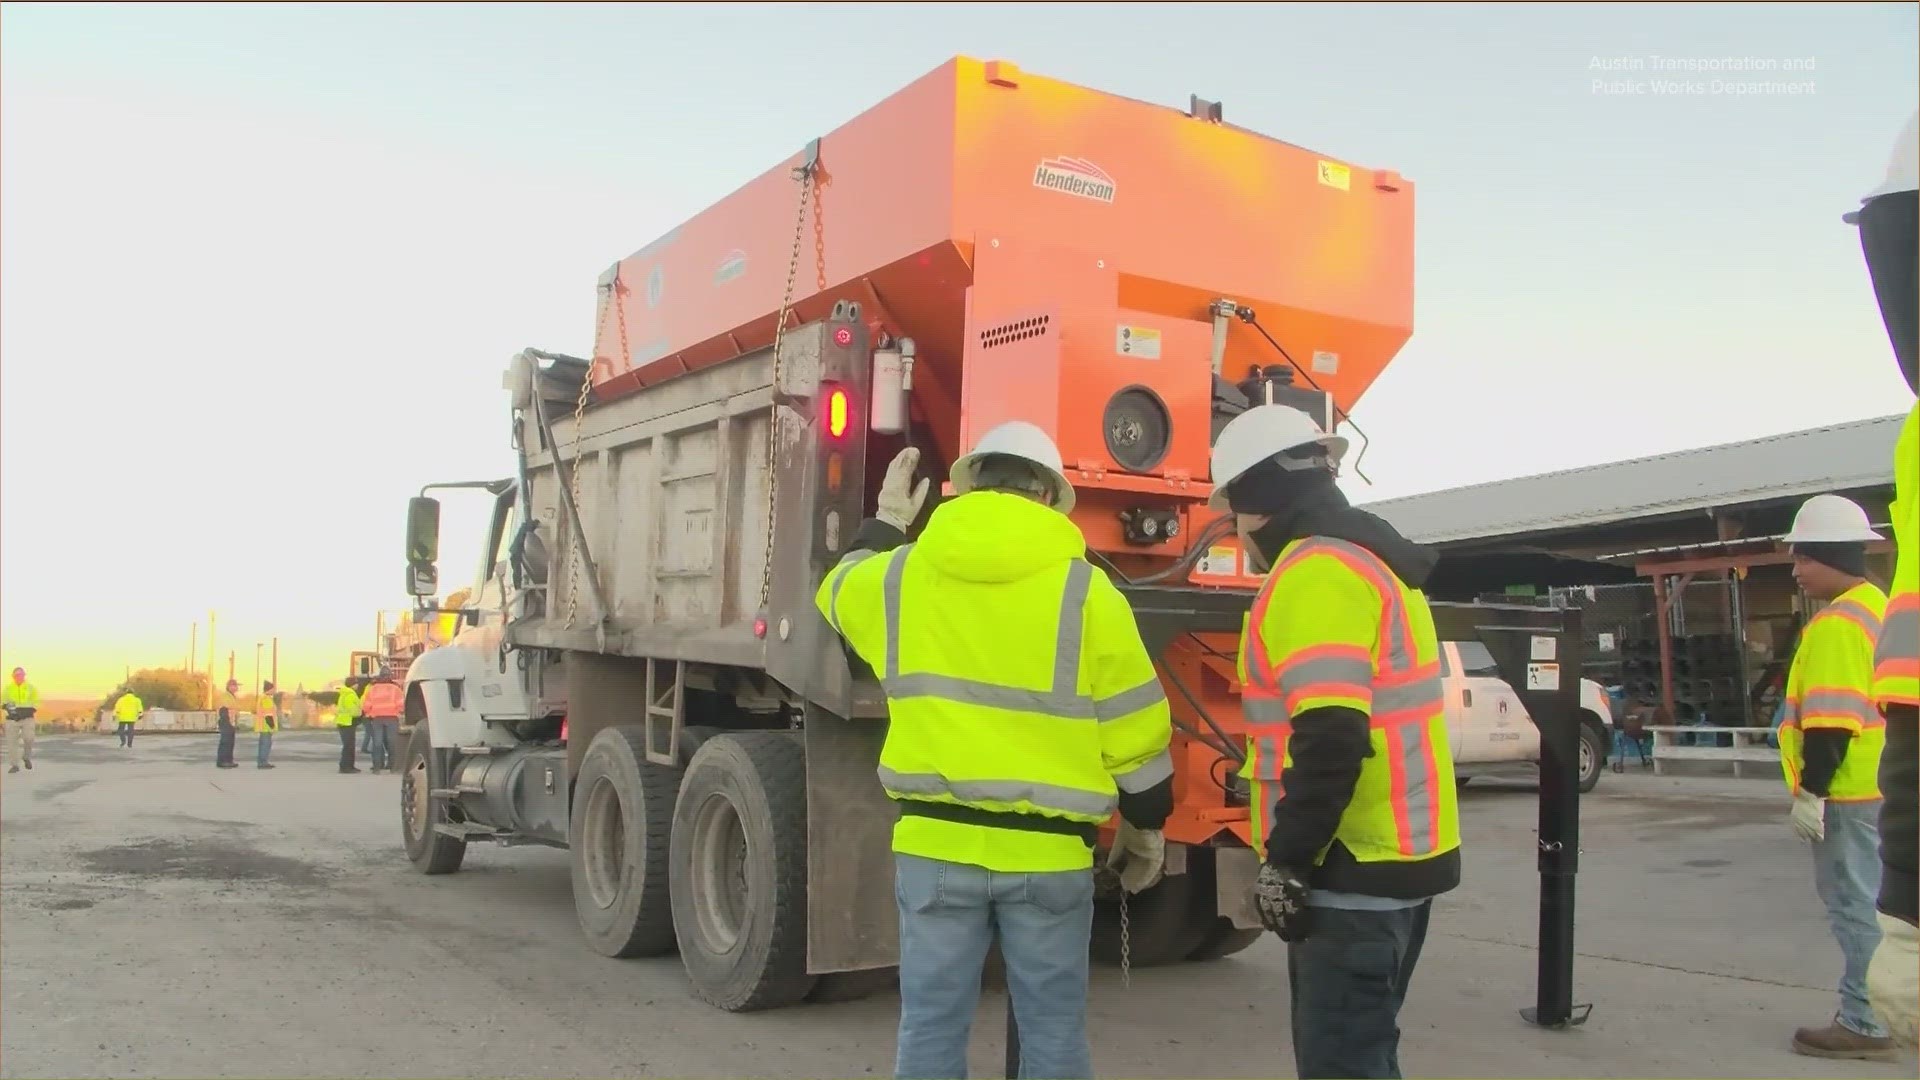 City of Austin crews are conducting drills so they will be ready when severe winter weather hits.